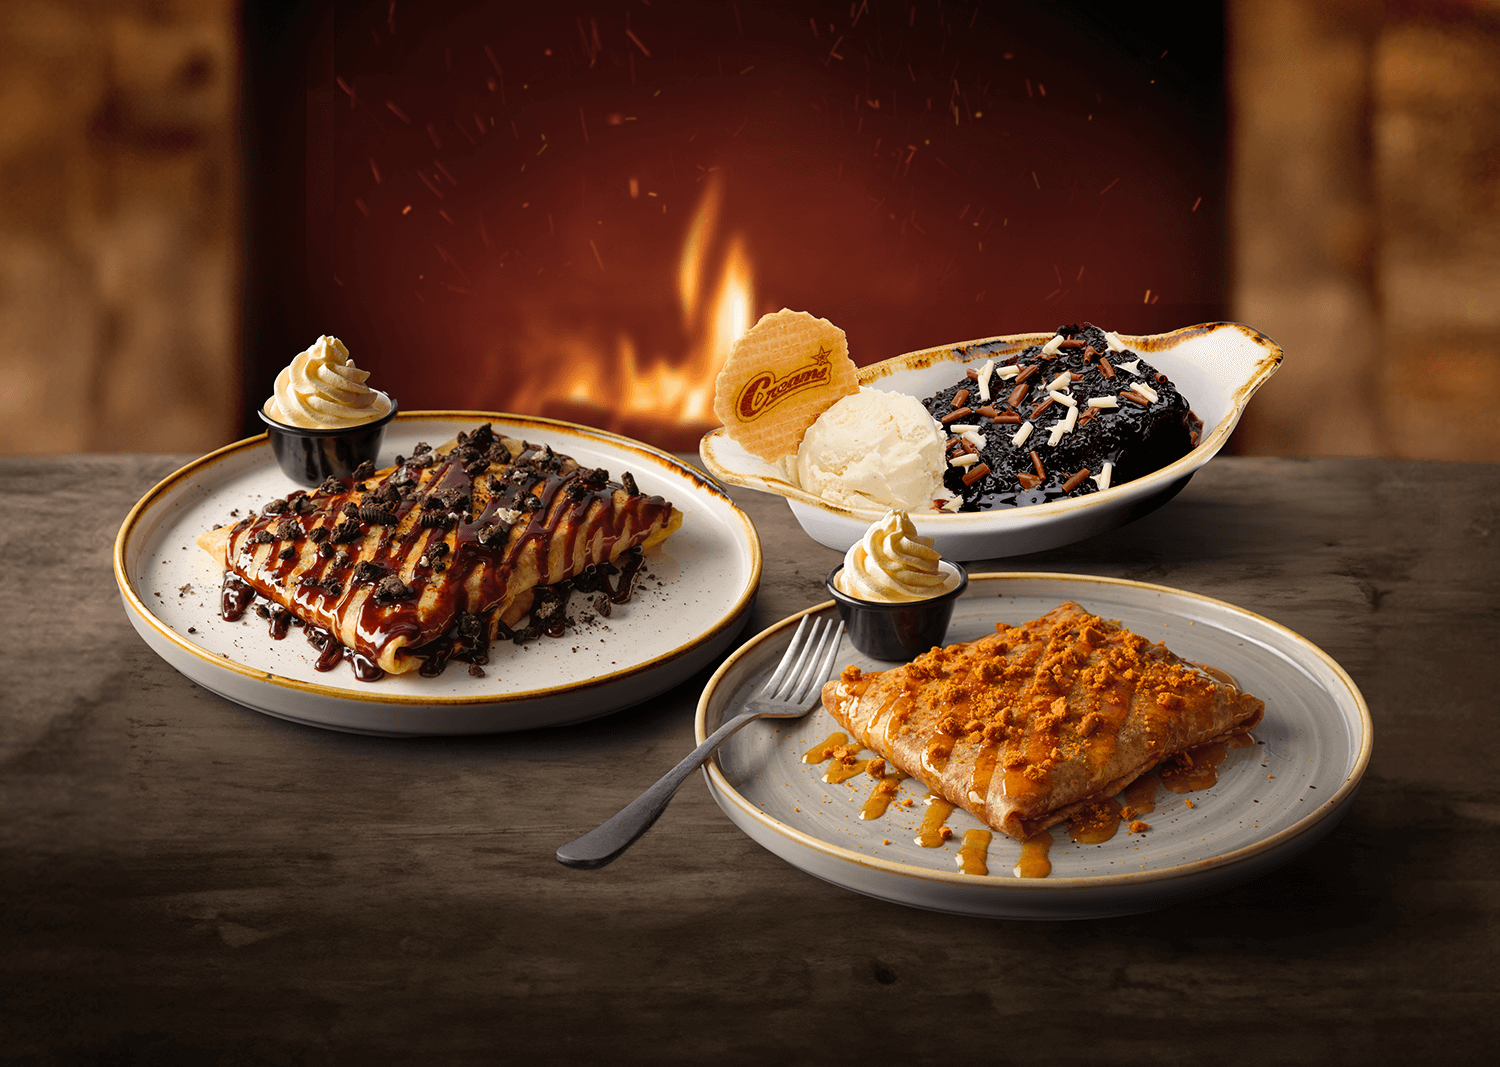 Introducing Creams Cafe's New Hot Winter Warmers Desserts